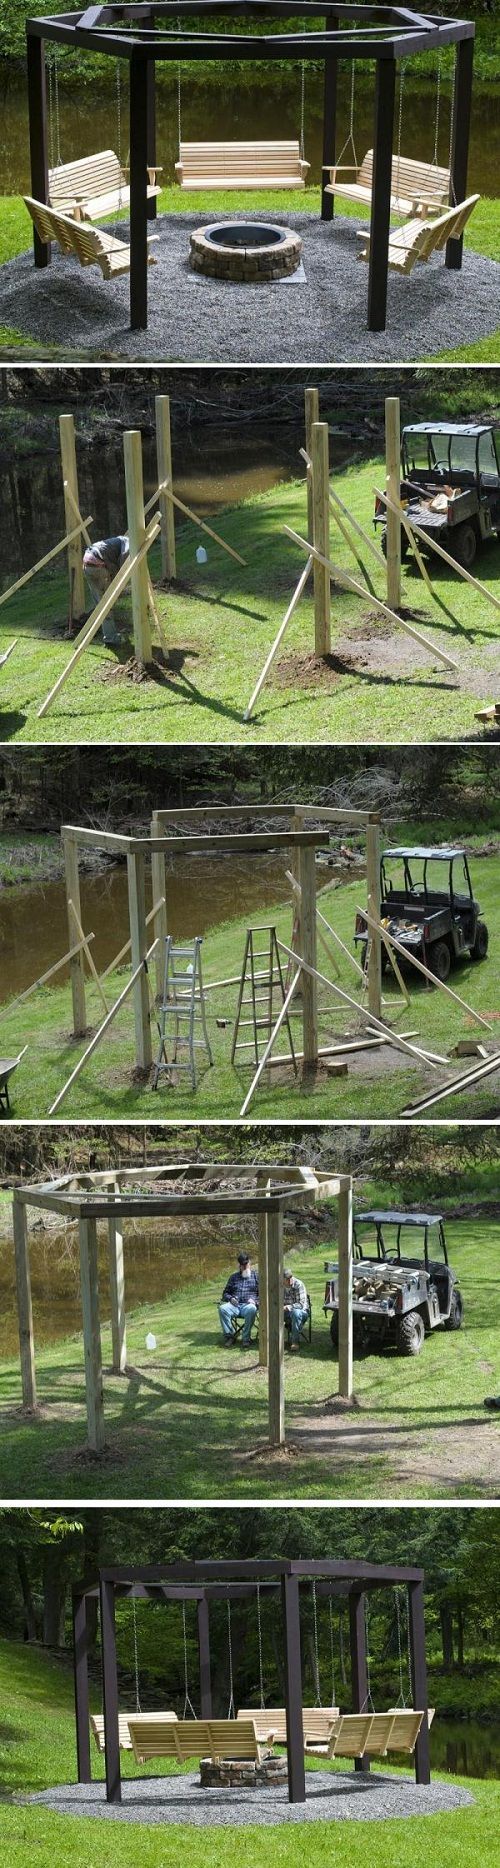 Awesome Swing Set Centered Around a Circular Fire Pit